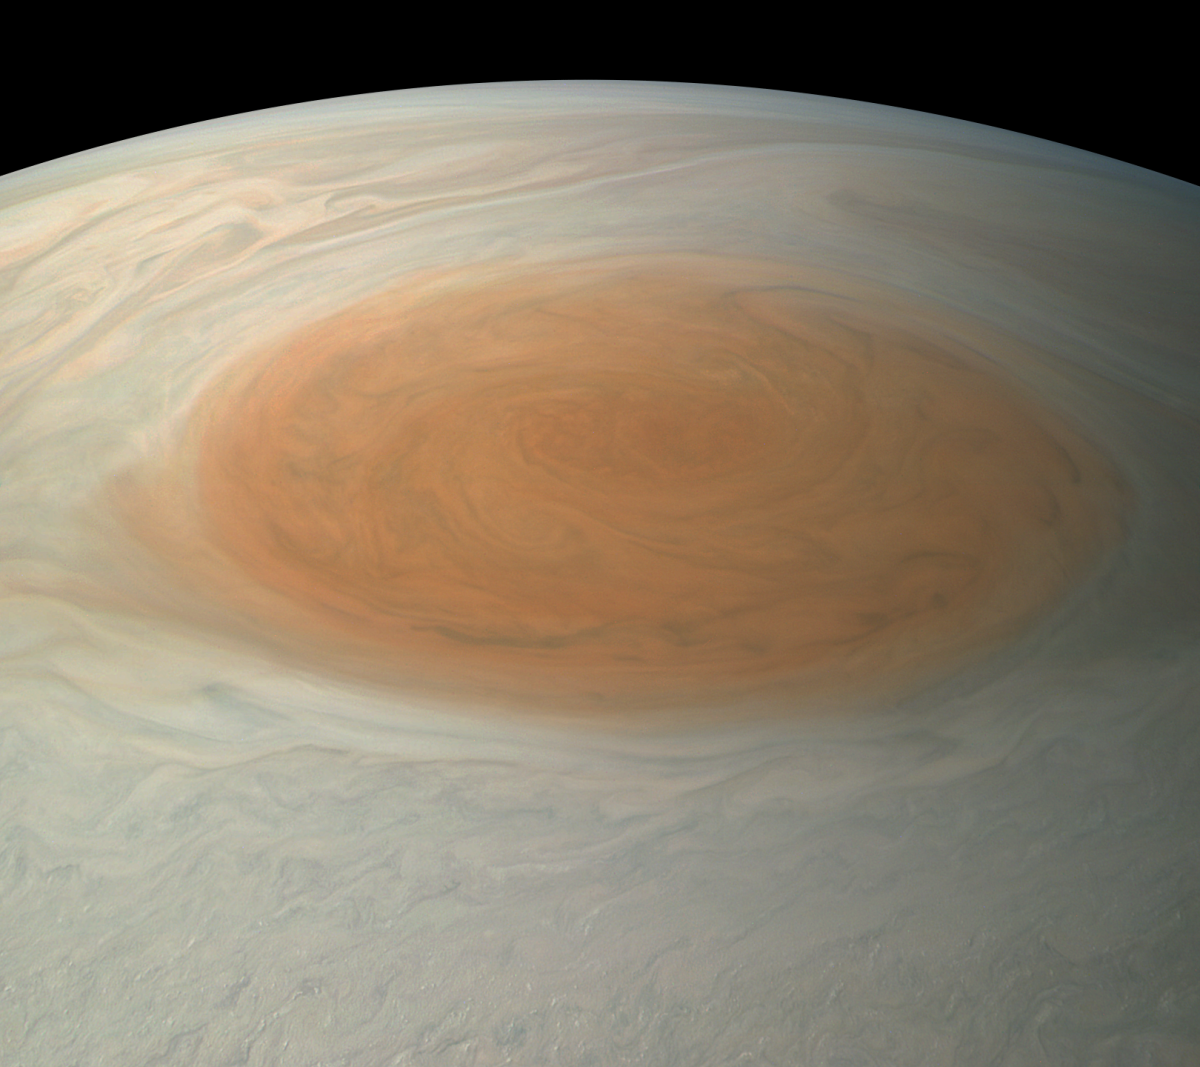 Here's what the Great Red Spot would look like if you could fly to Jupiter to see the monster hurricane yourself